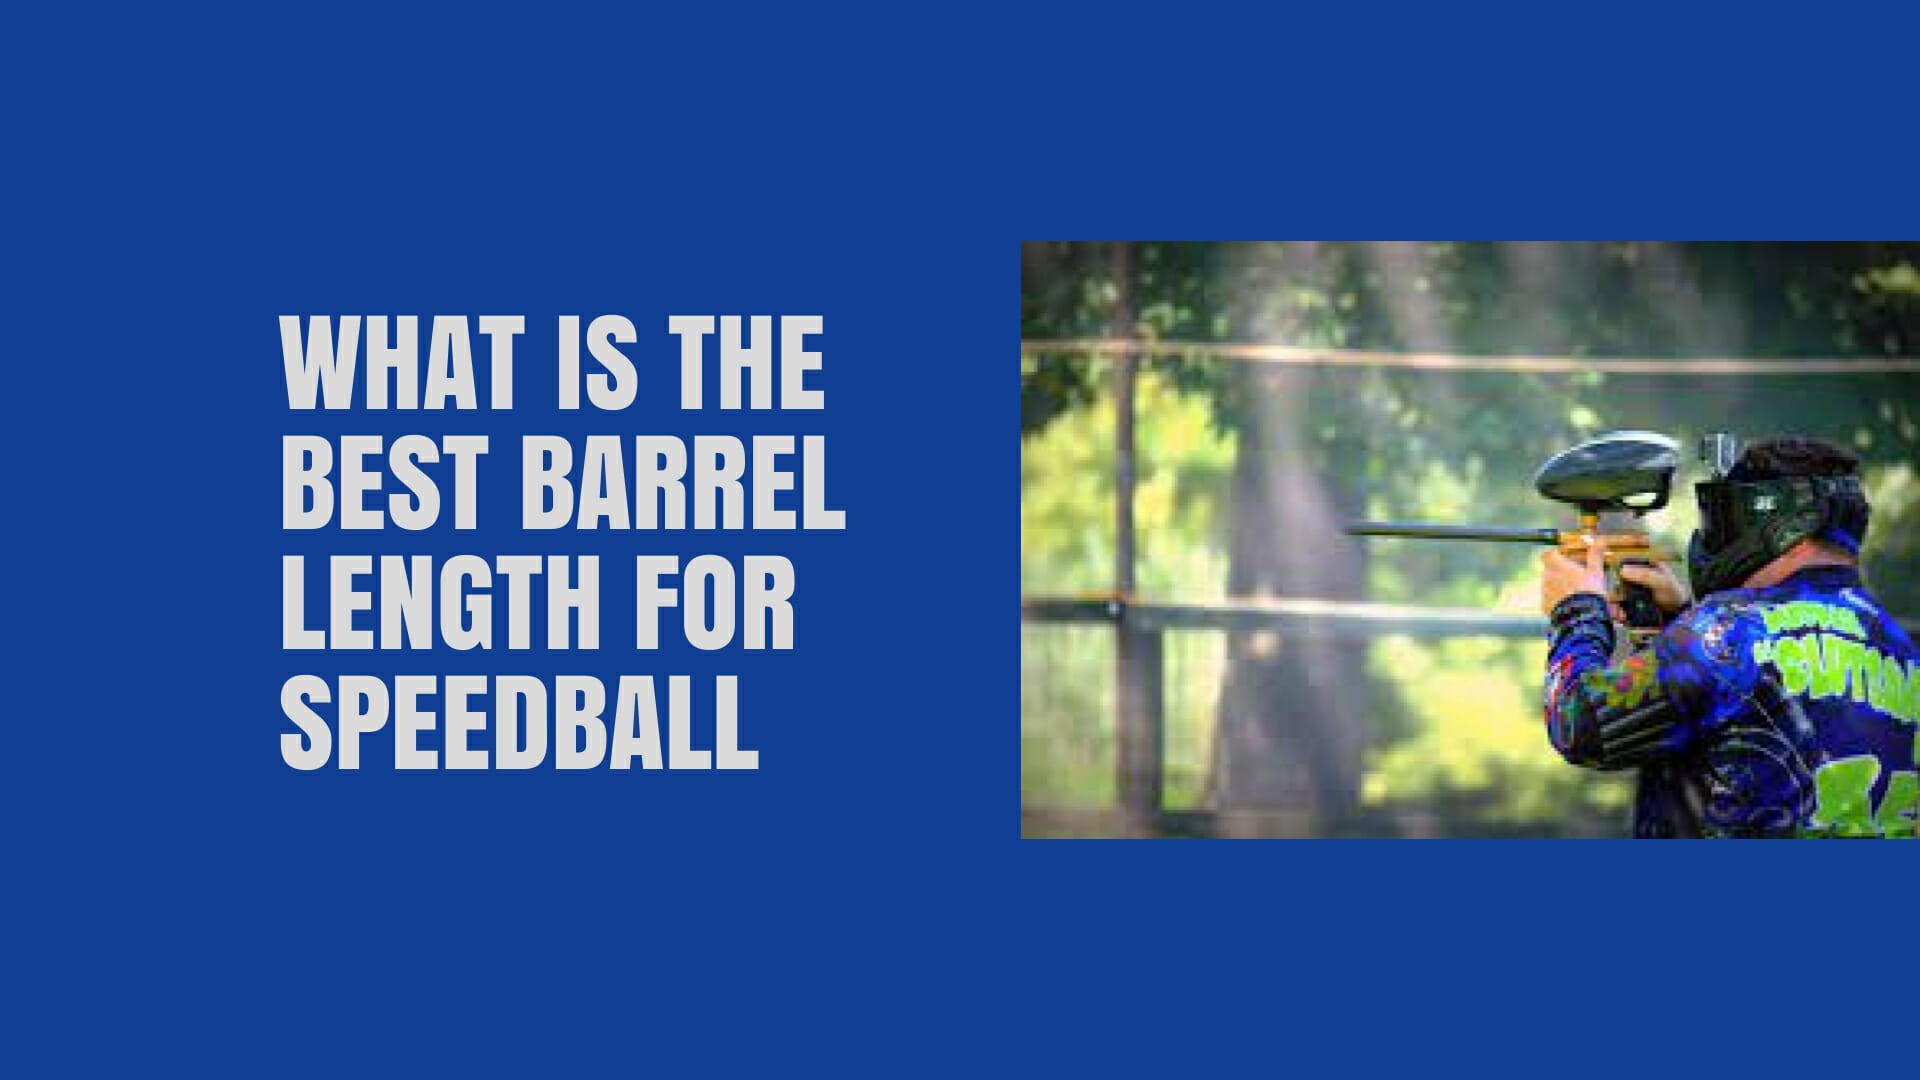 What is the Best Barrel Length for Speedball